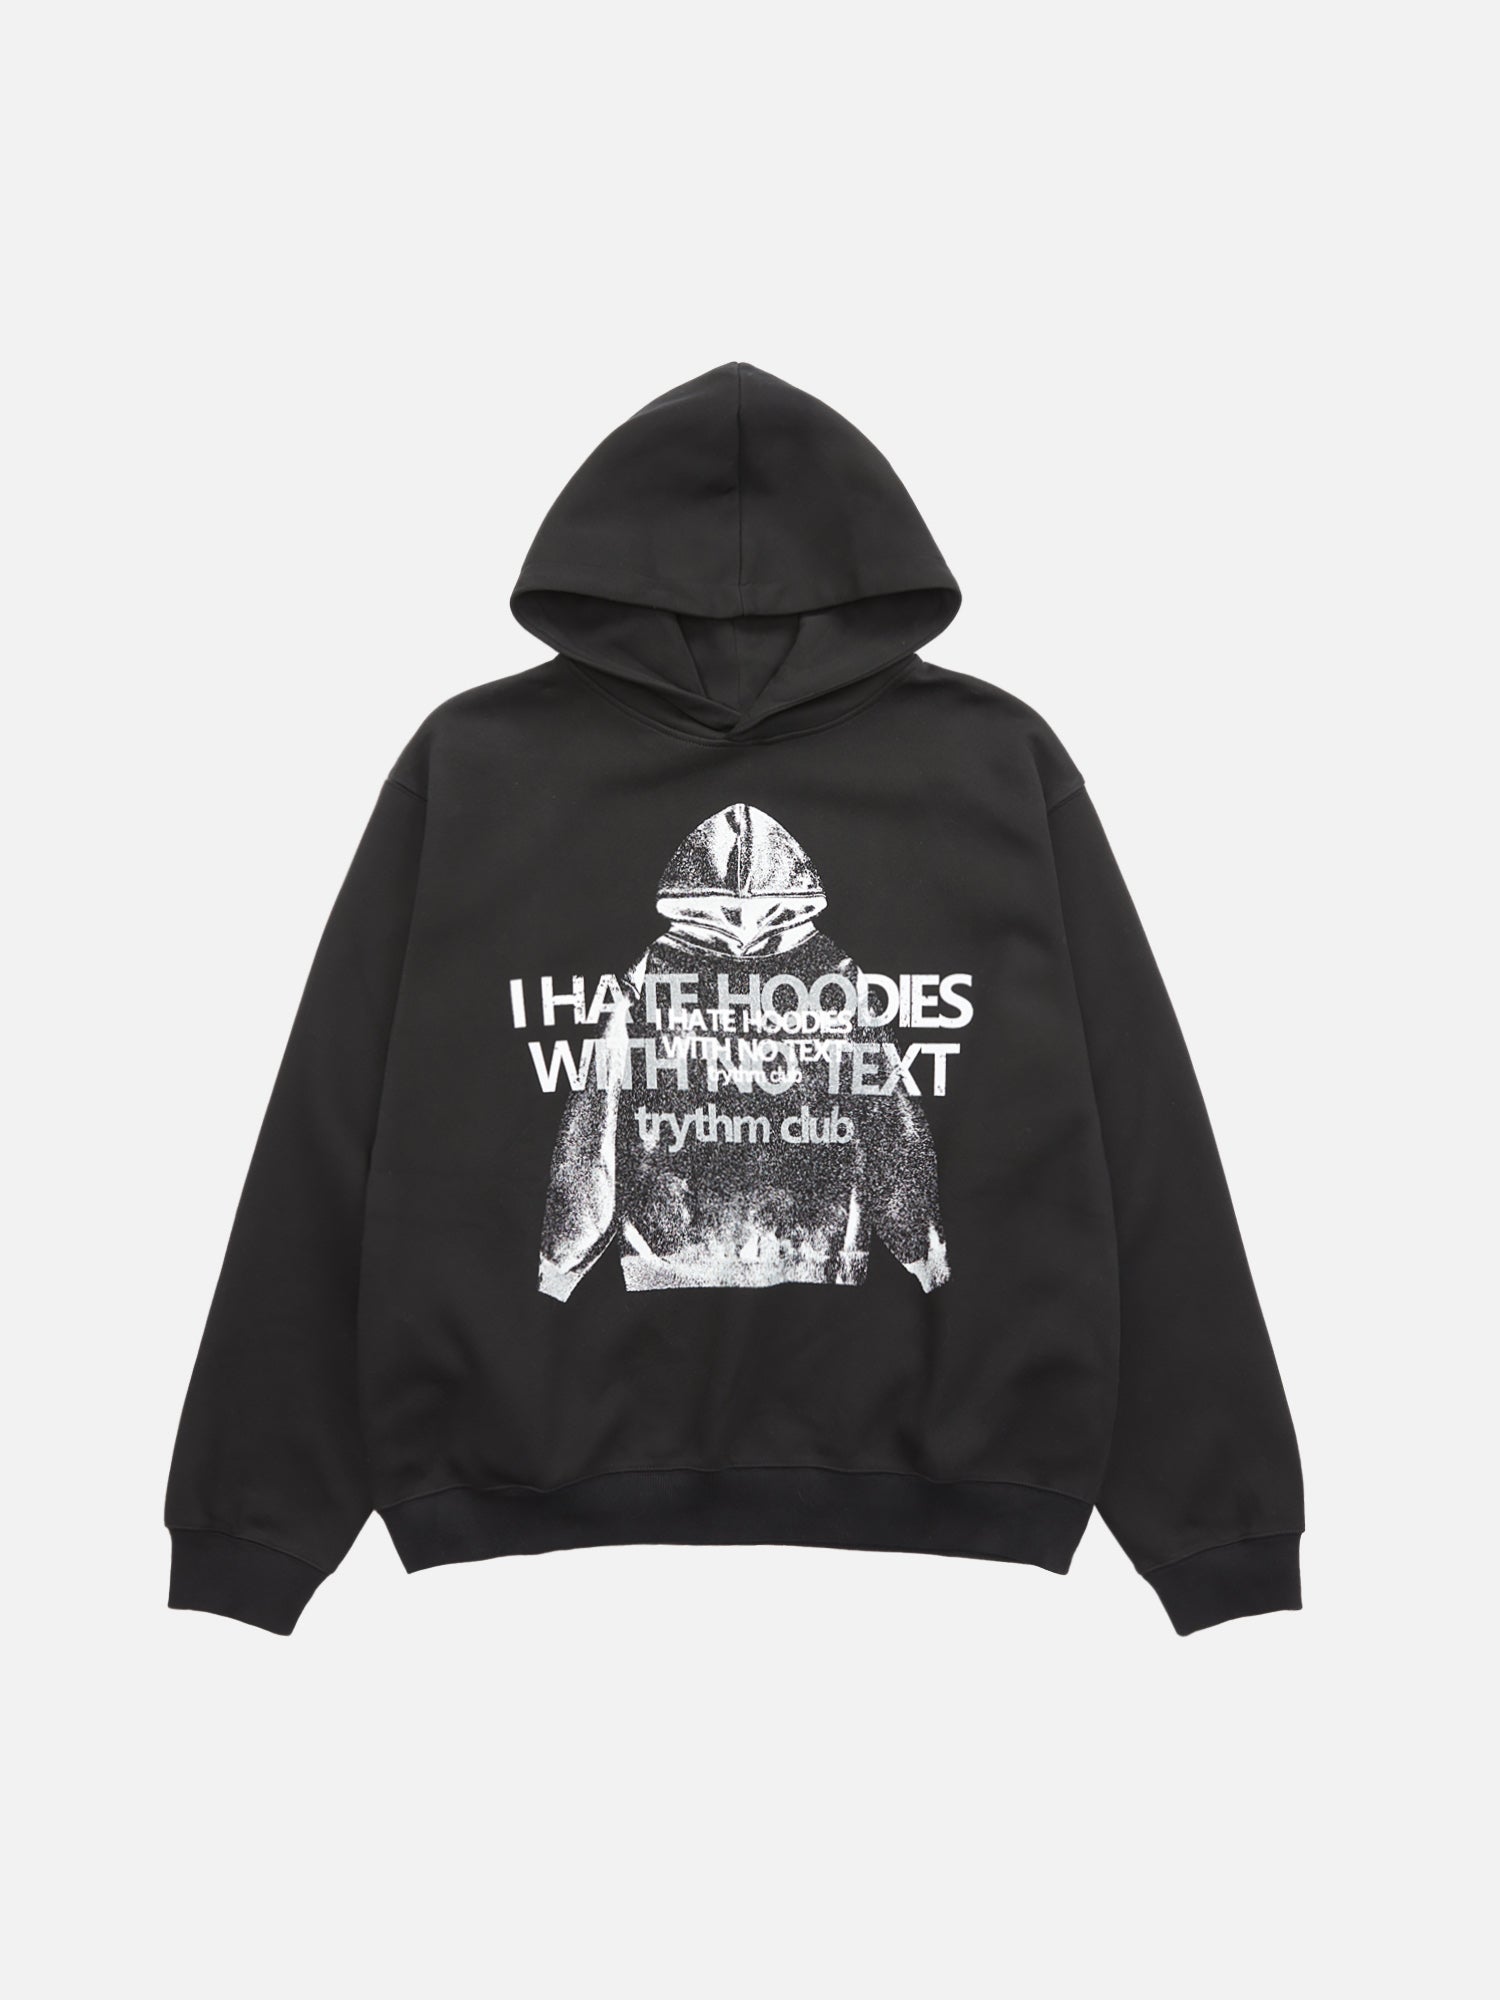 Thesupermade Fun Lettering Double Print Hoodie - 1964